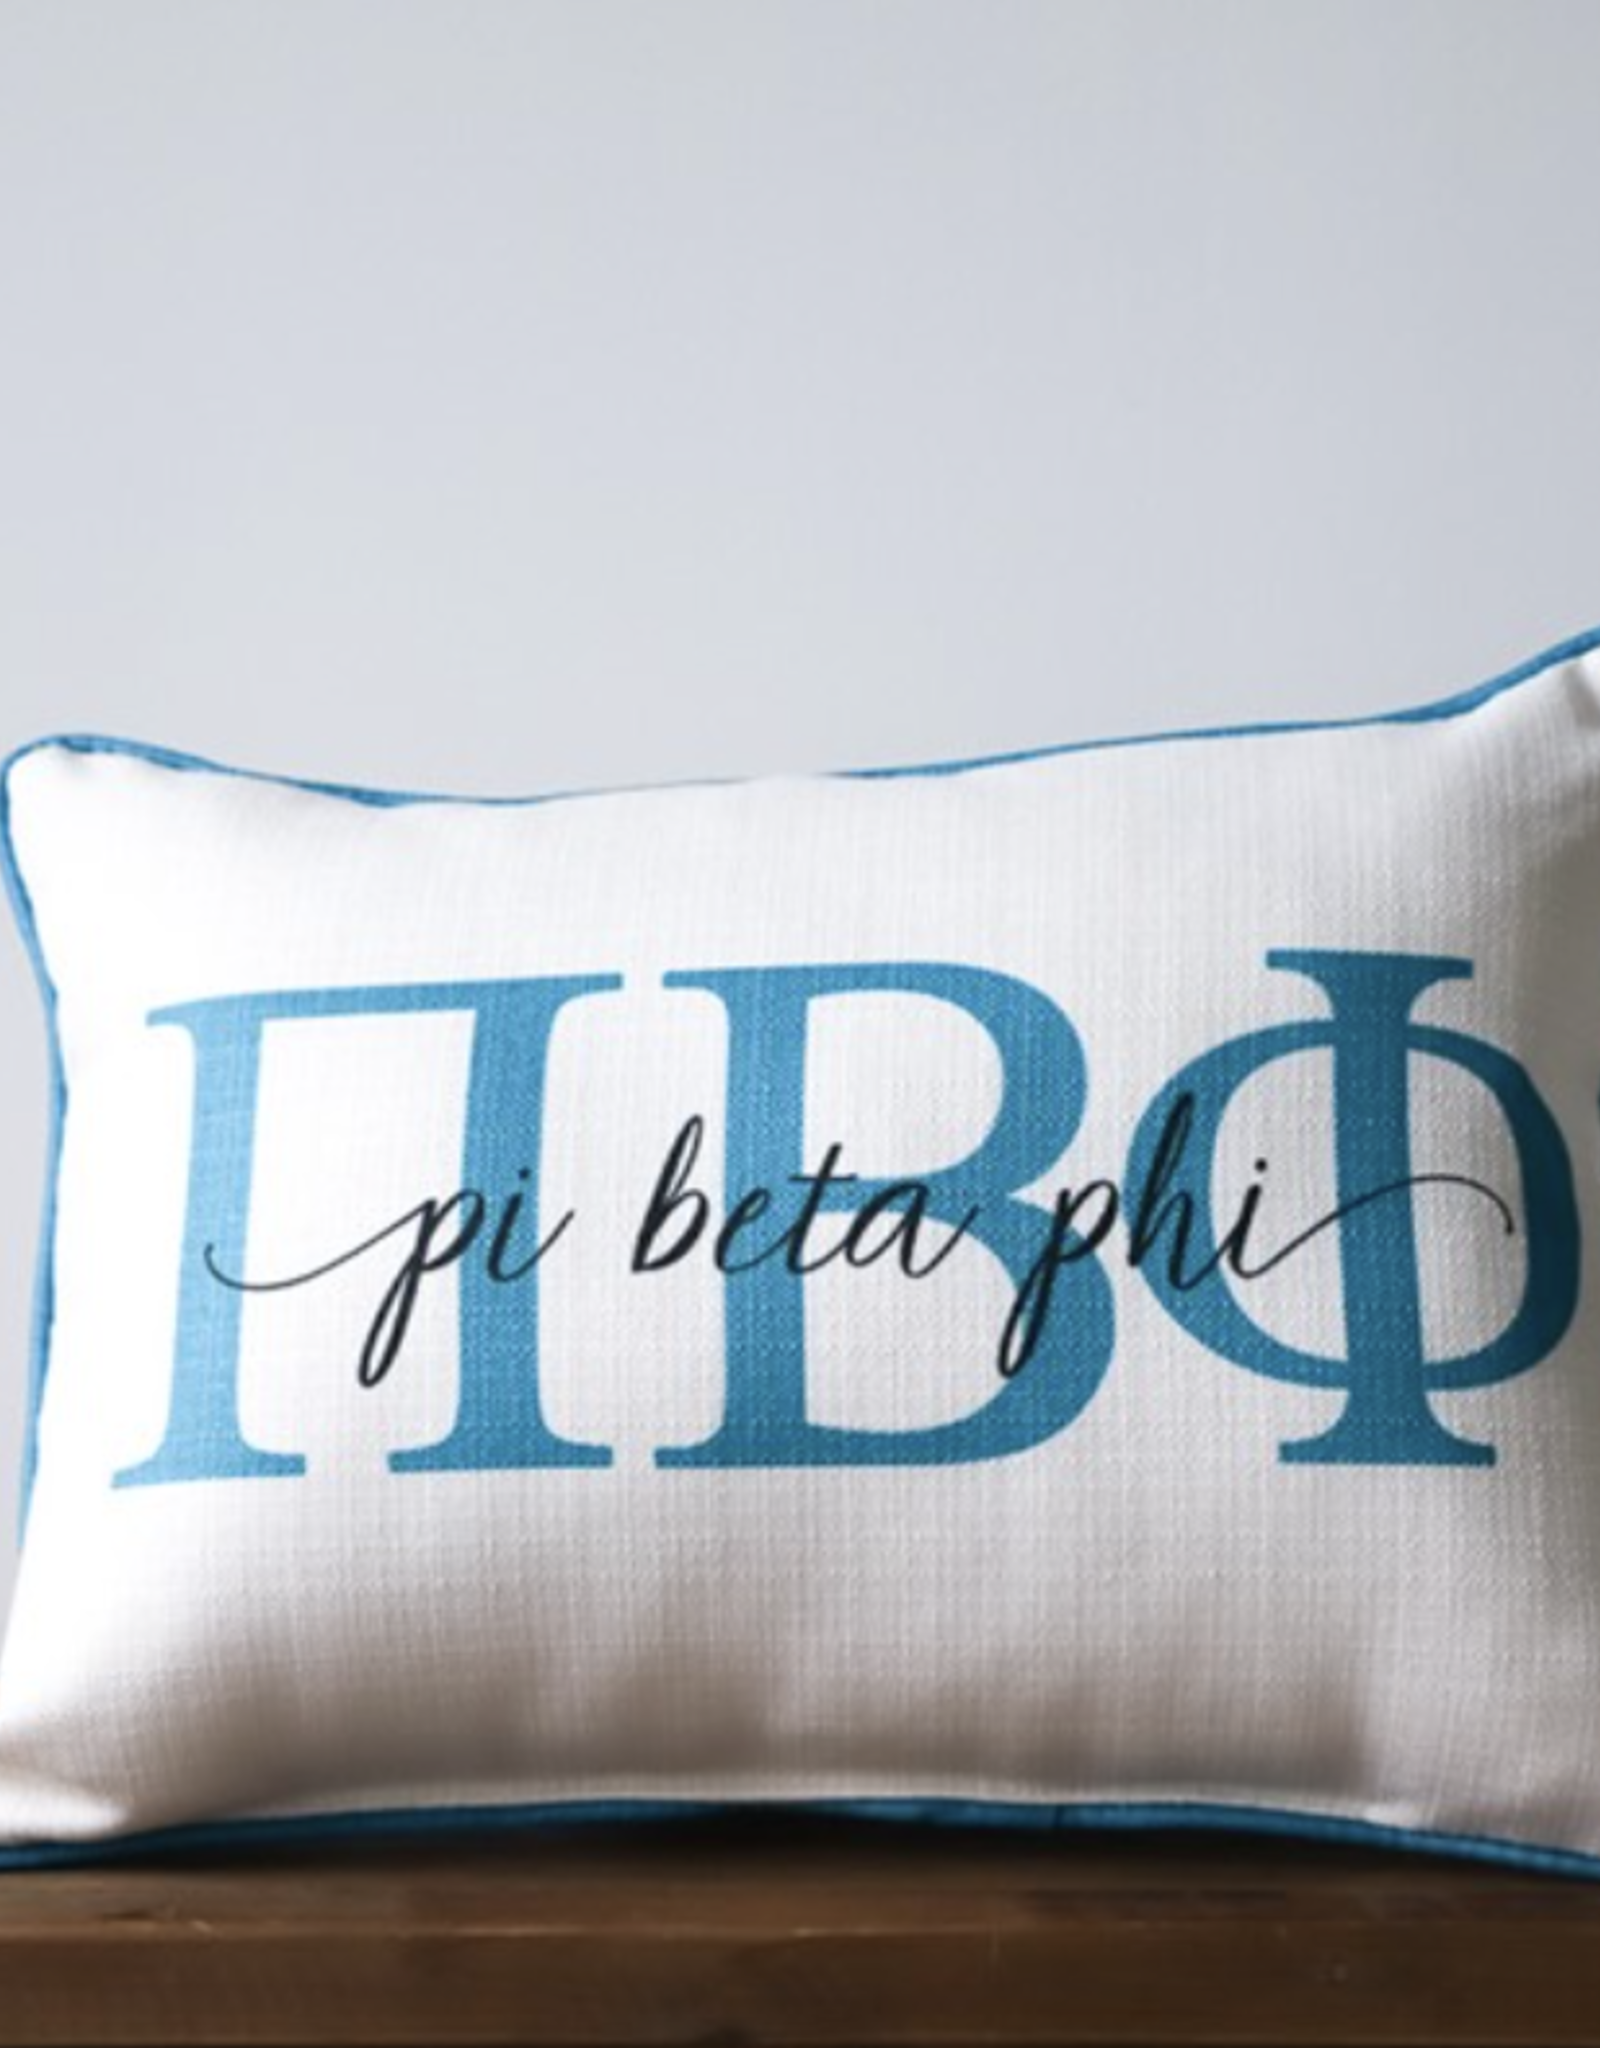 Little Birdie Pi Beta Phi Sorority Large Letters Overlap Pillow W/Piping